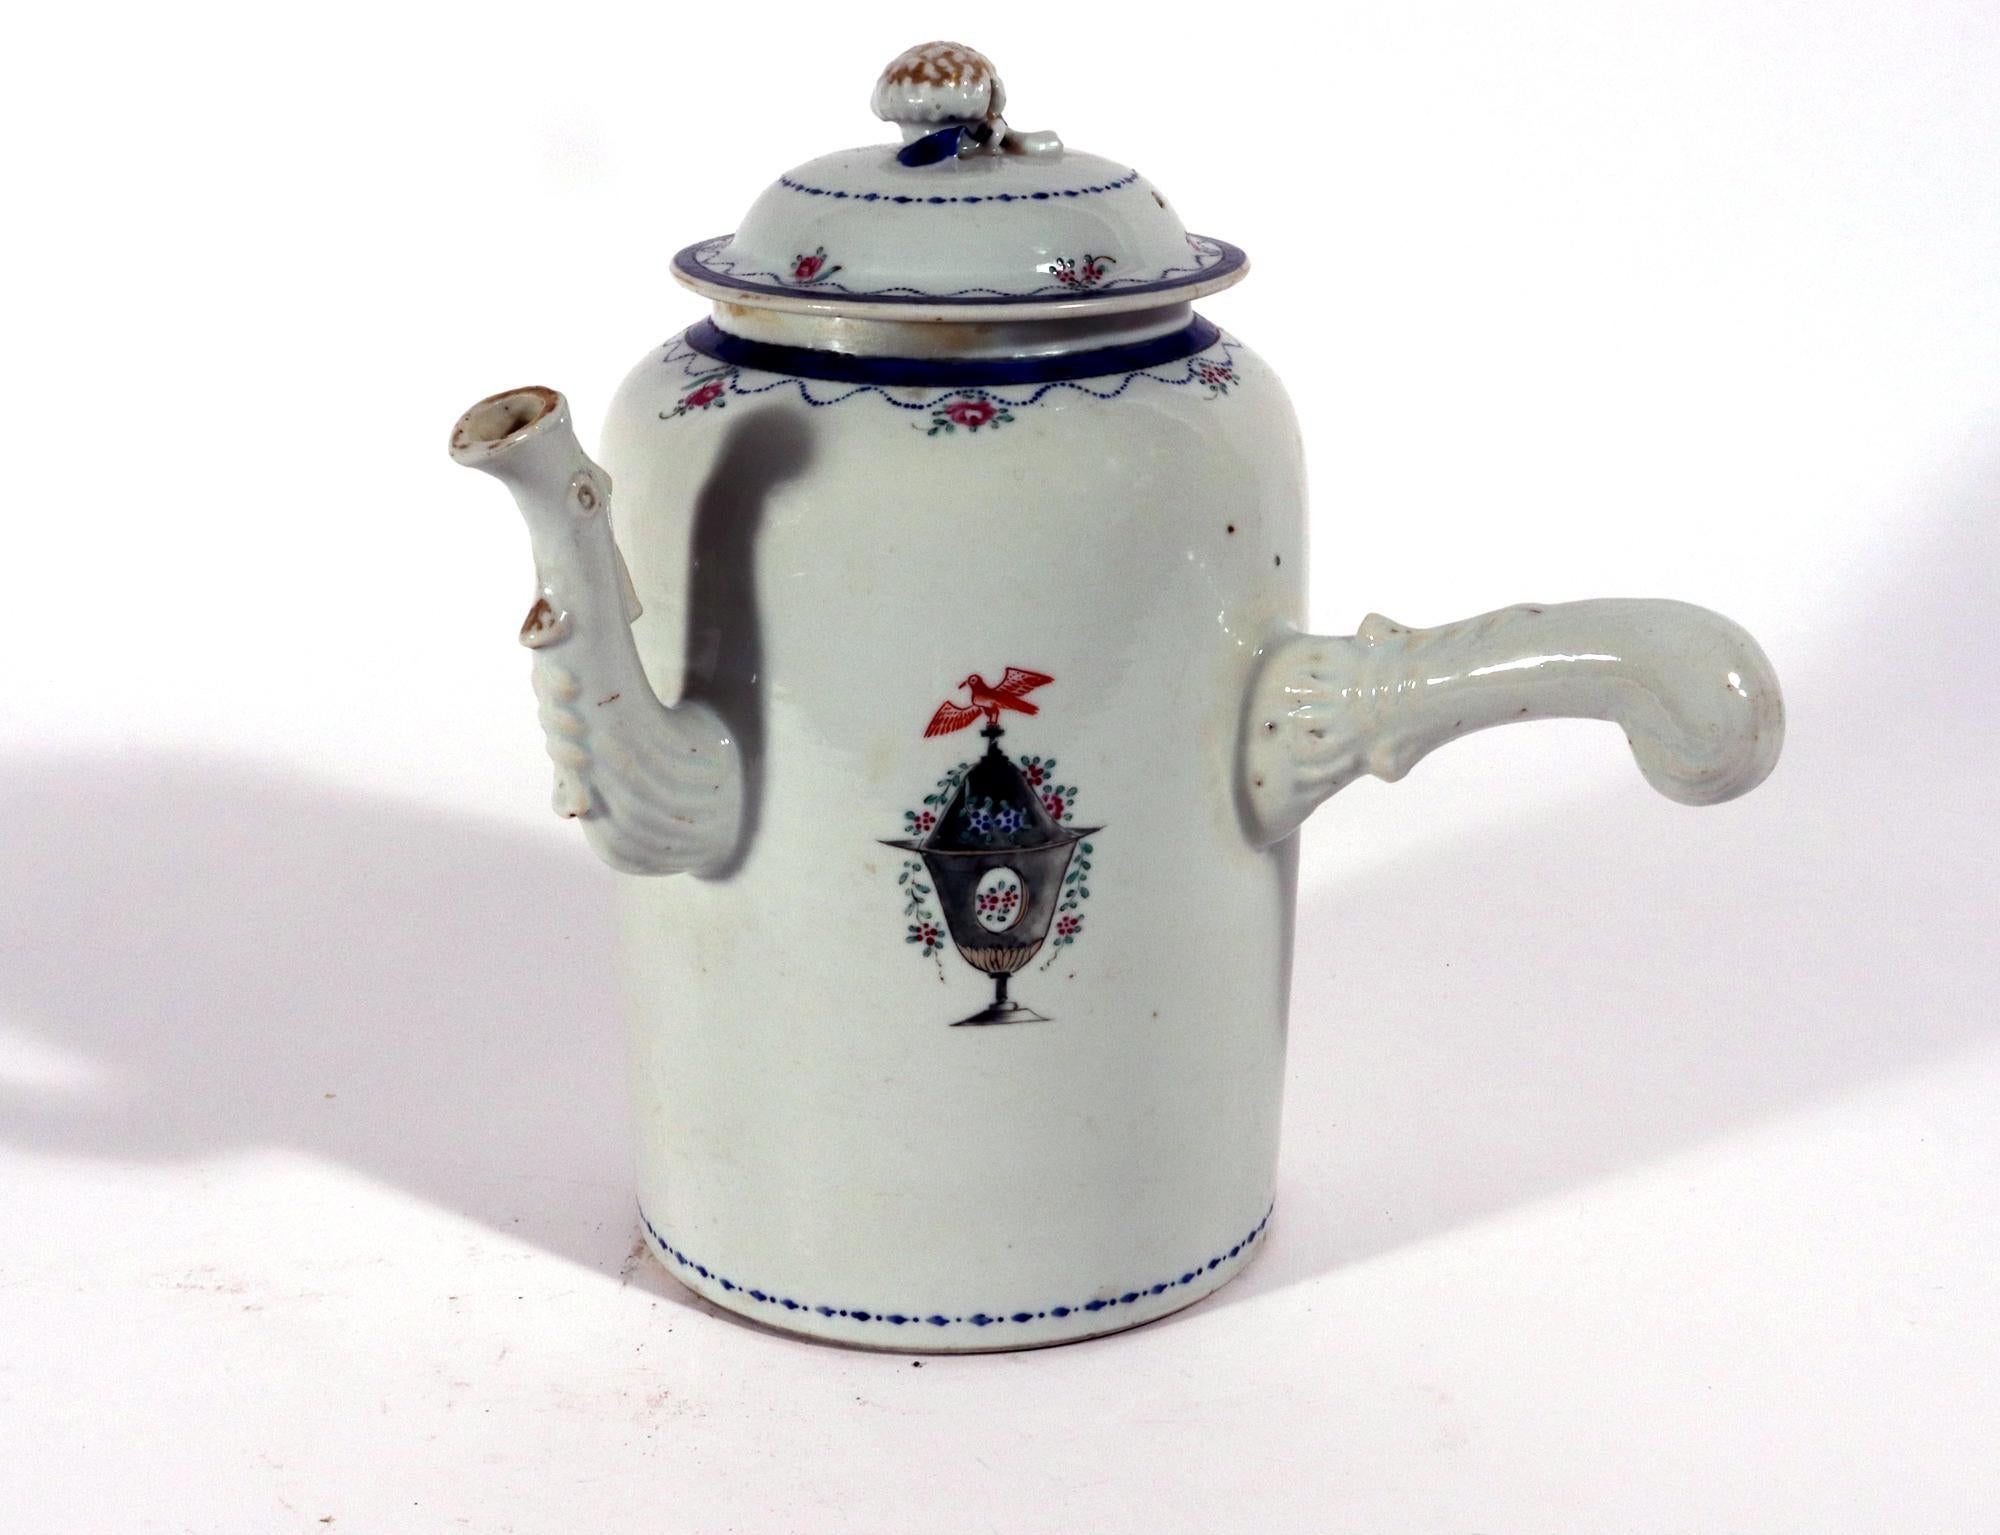 Chinese Export Porcelain Chocolate Pot and Cover,
American Market,
Circa 17 85-95

The Chinese Export porcelain chocolate pot and domed cover is painted to each side with an en grisaille urn with famille rose flowers issuing from the cover and